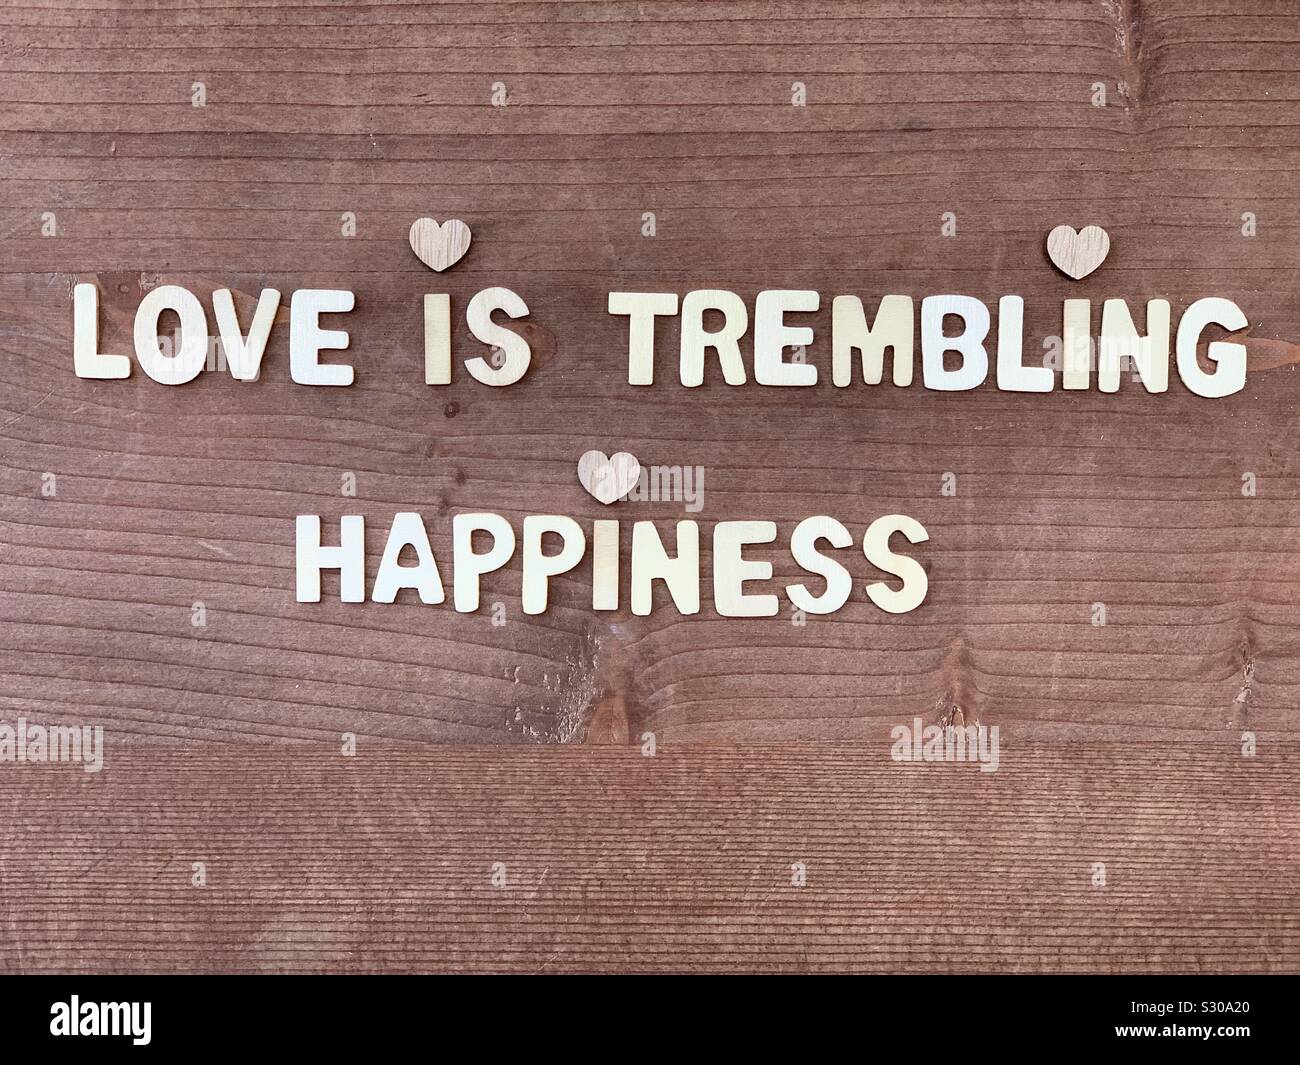 Love is trembling happiness Stock Photo